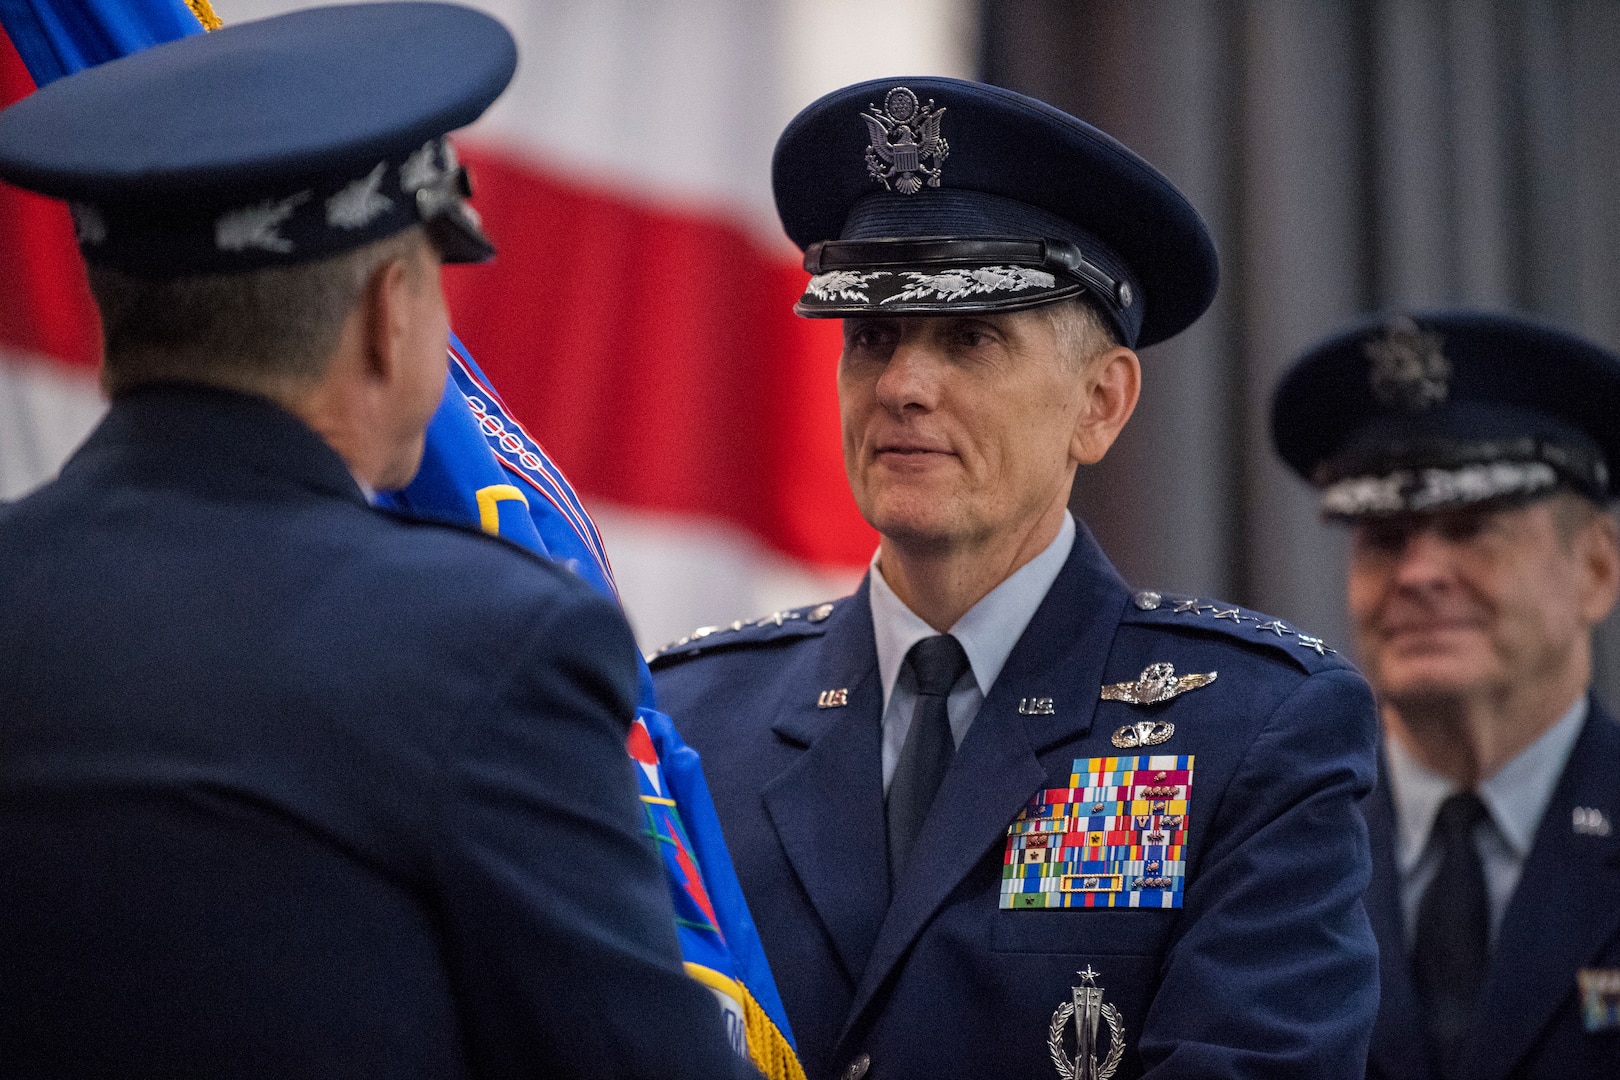 Gen. Timothy Ray accepts the Air Force Global Strike Command flag from Air Force Chief of Staff Gen. David L. Goldfein during a change of command ceremony at Barksdale Air Force Base, La., Aug. 21, 2018